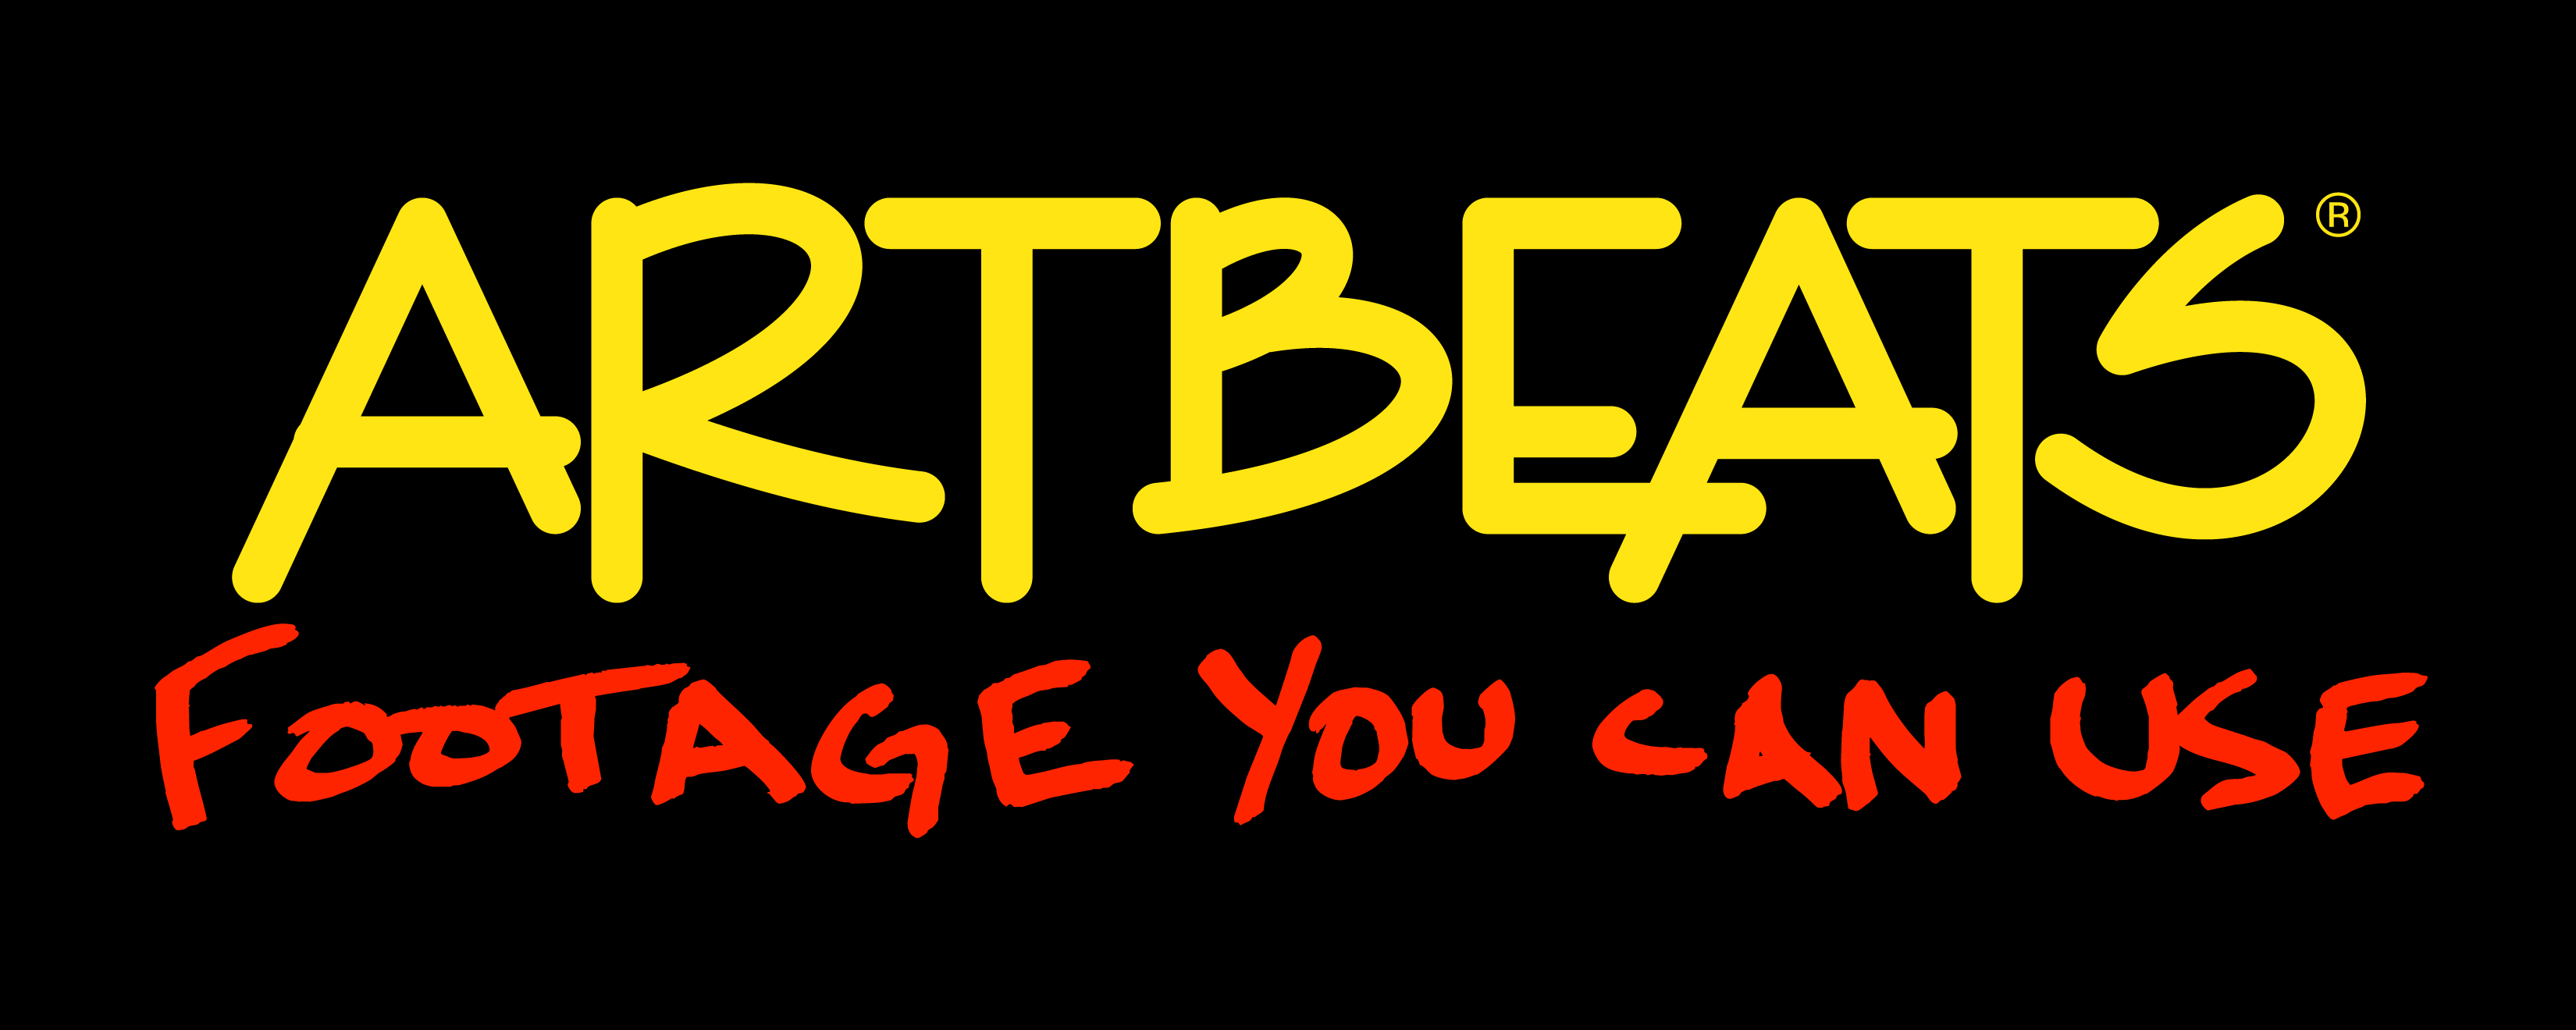 Artbeats Gives Customers Access to Free Premium Video Footage 2